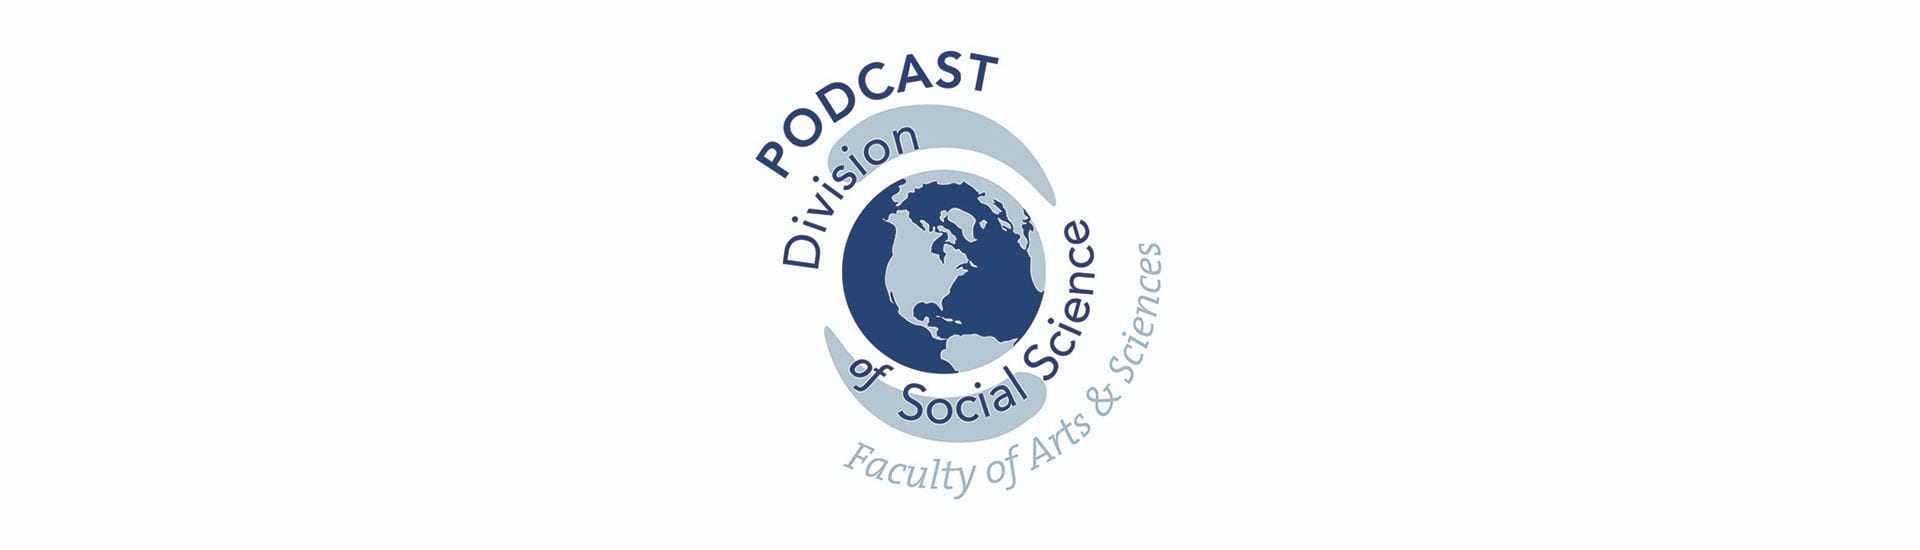 Division of Social Science, Faculty of Arts & Sciences, Podcast Logo (globe cupped by abstract hands, words surrounding)